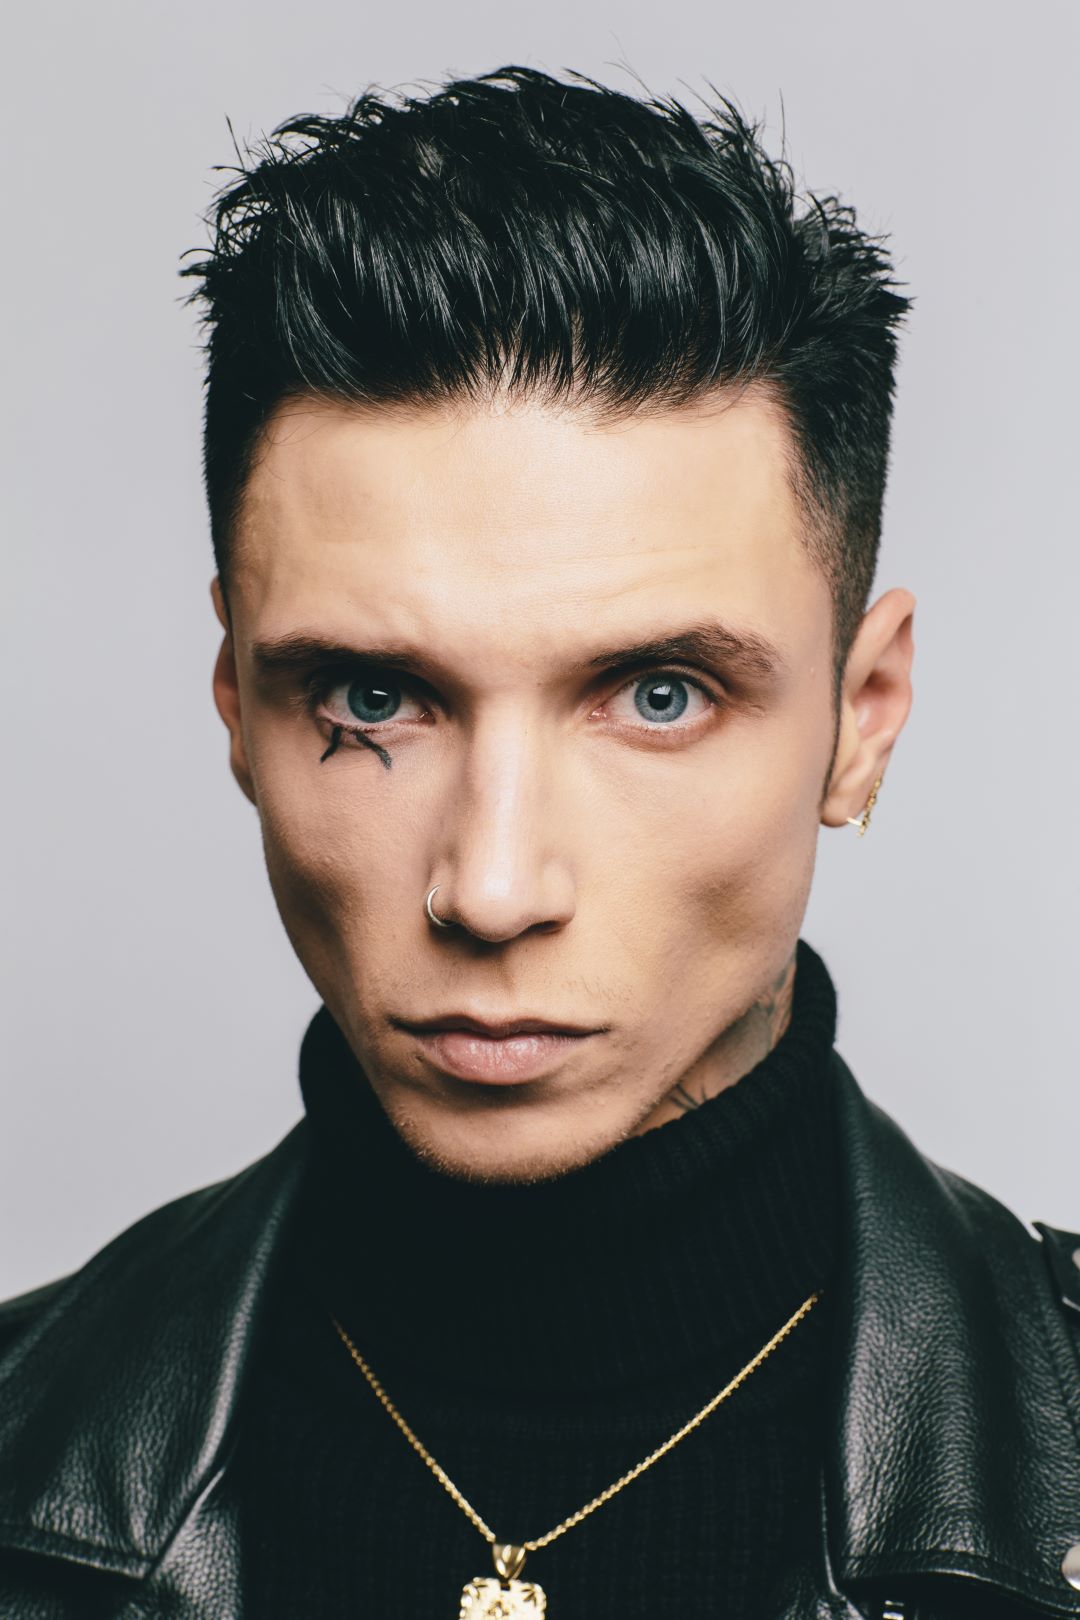 Andy Black - 'The Ghost of Ohio' Album Review - Frame The Stage